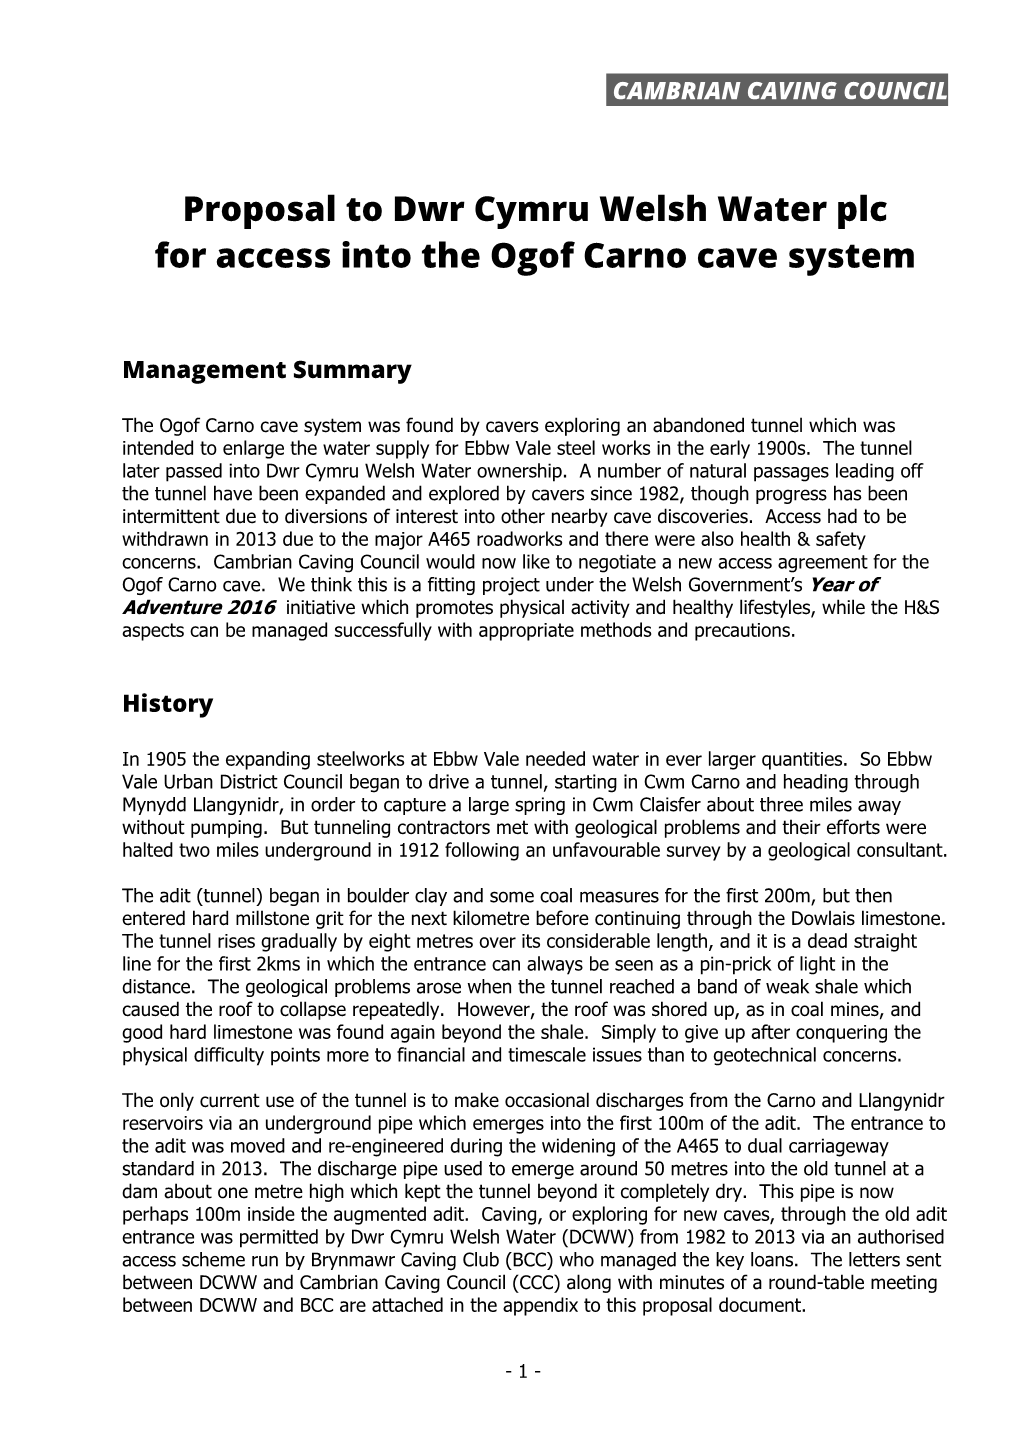 Proposal to Dwr Cymru Welsh Water Plc for Access Into the Ogof Carno Cave System